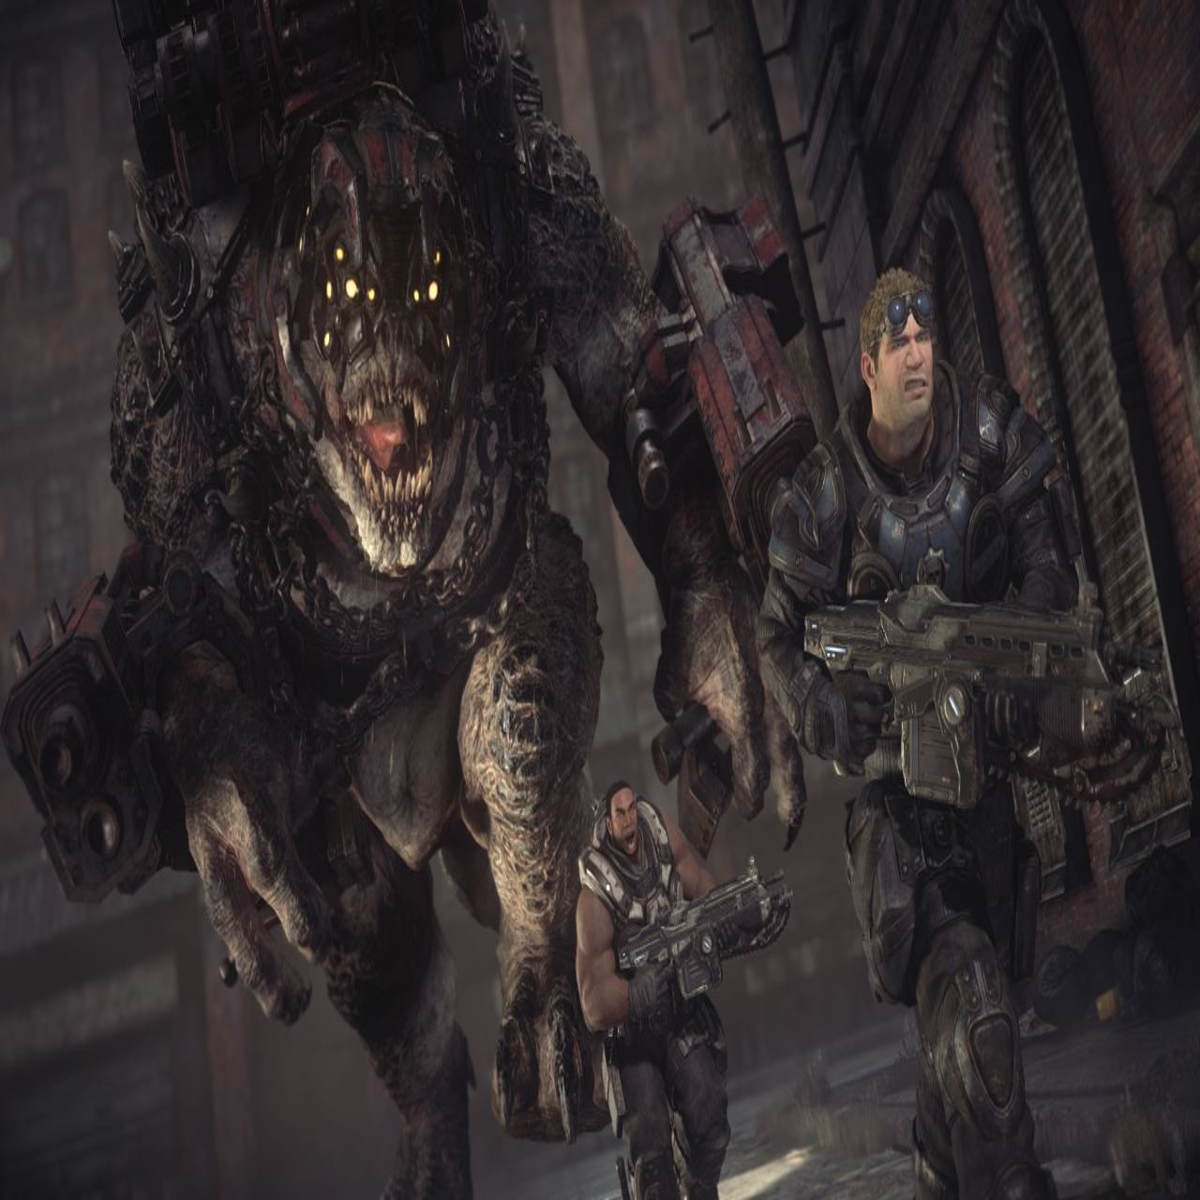 Gears of War 4 Releases Gameplay Footage and Another Execution [UPDATE]